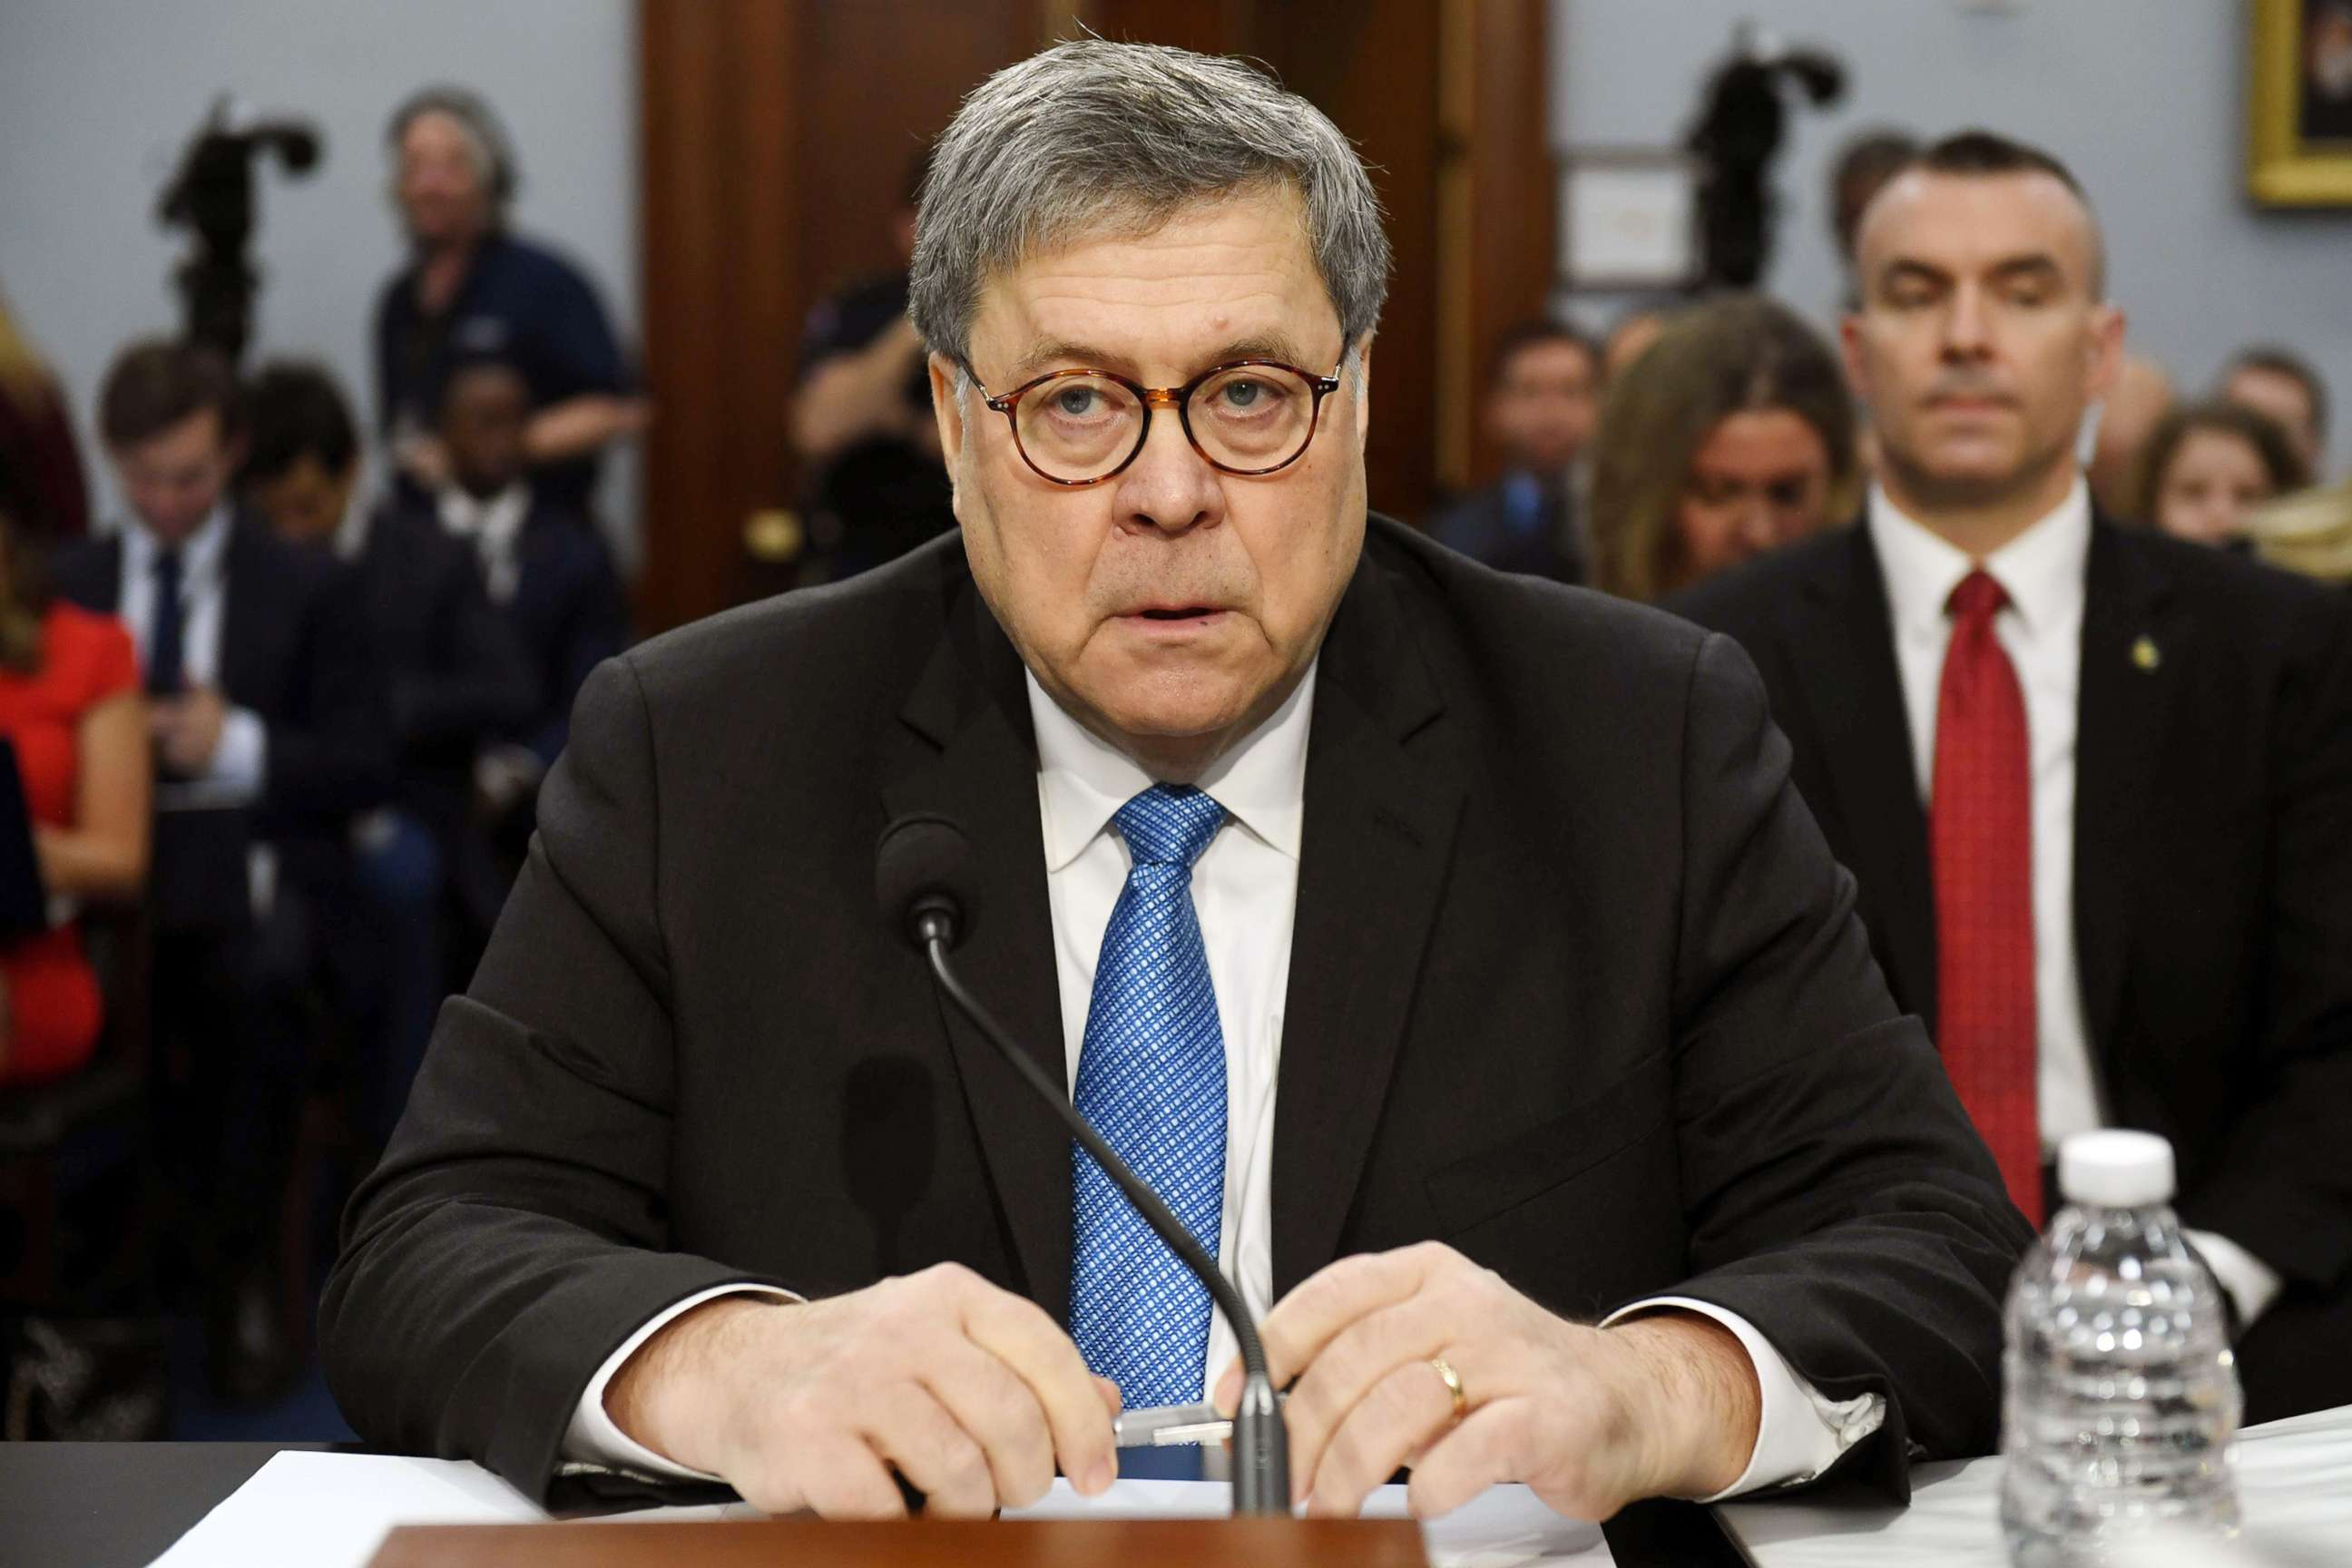 Attorney General William Barr waits to testify during a US House Commerce, Justice, Science, and Related Agencies Subcommittee hearing on the Department of Justice Budget Request for Fiscal Year 2020, on Capitol Hill in Washington, D.C., April 9, 2019.